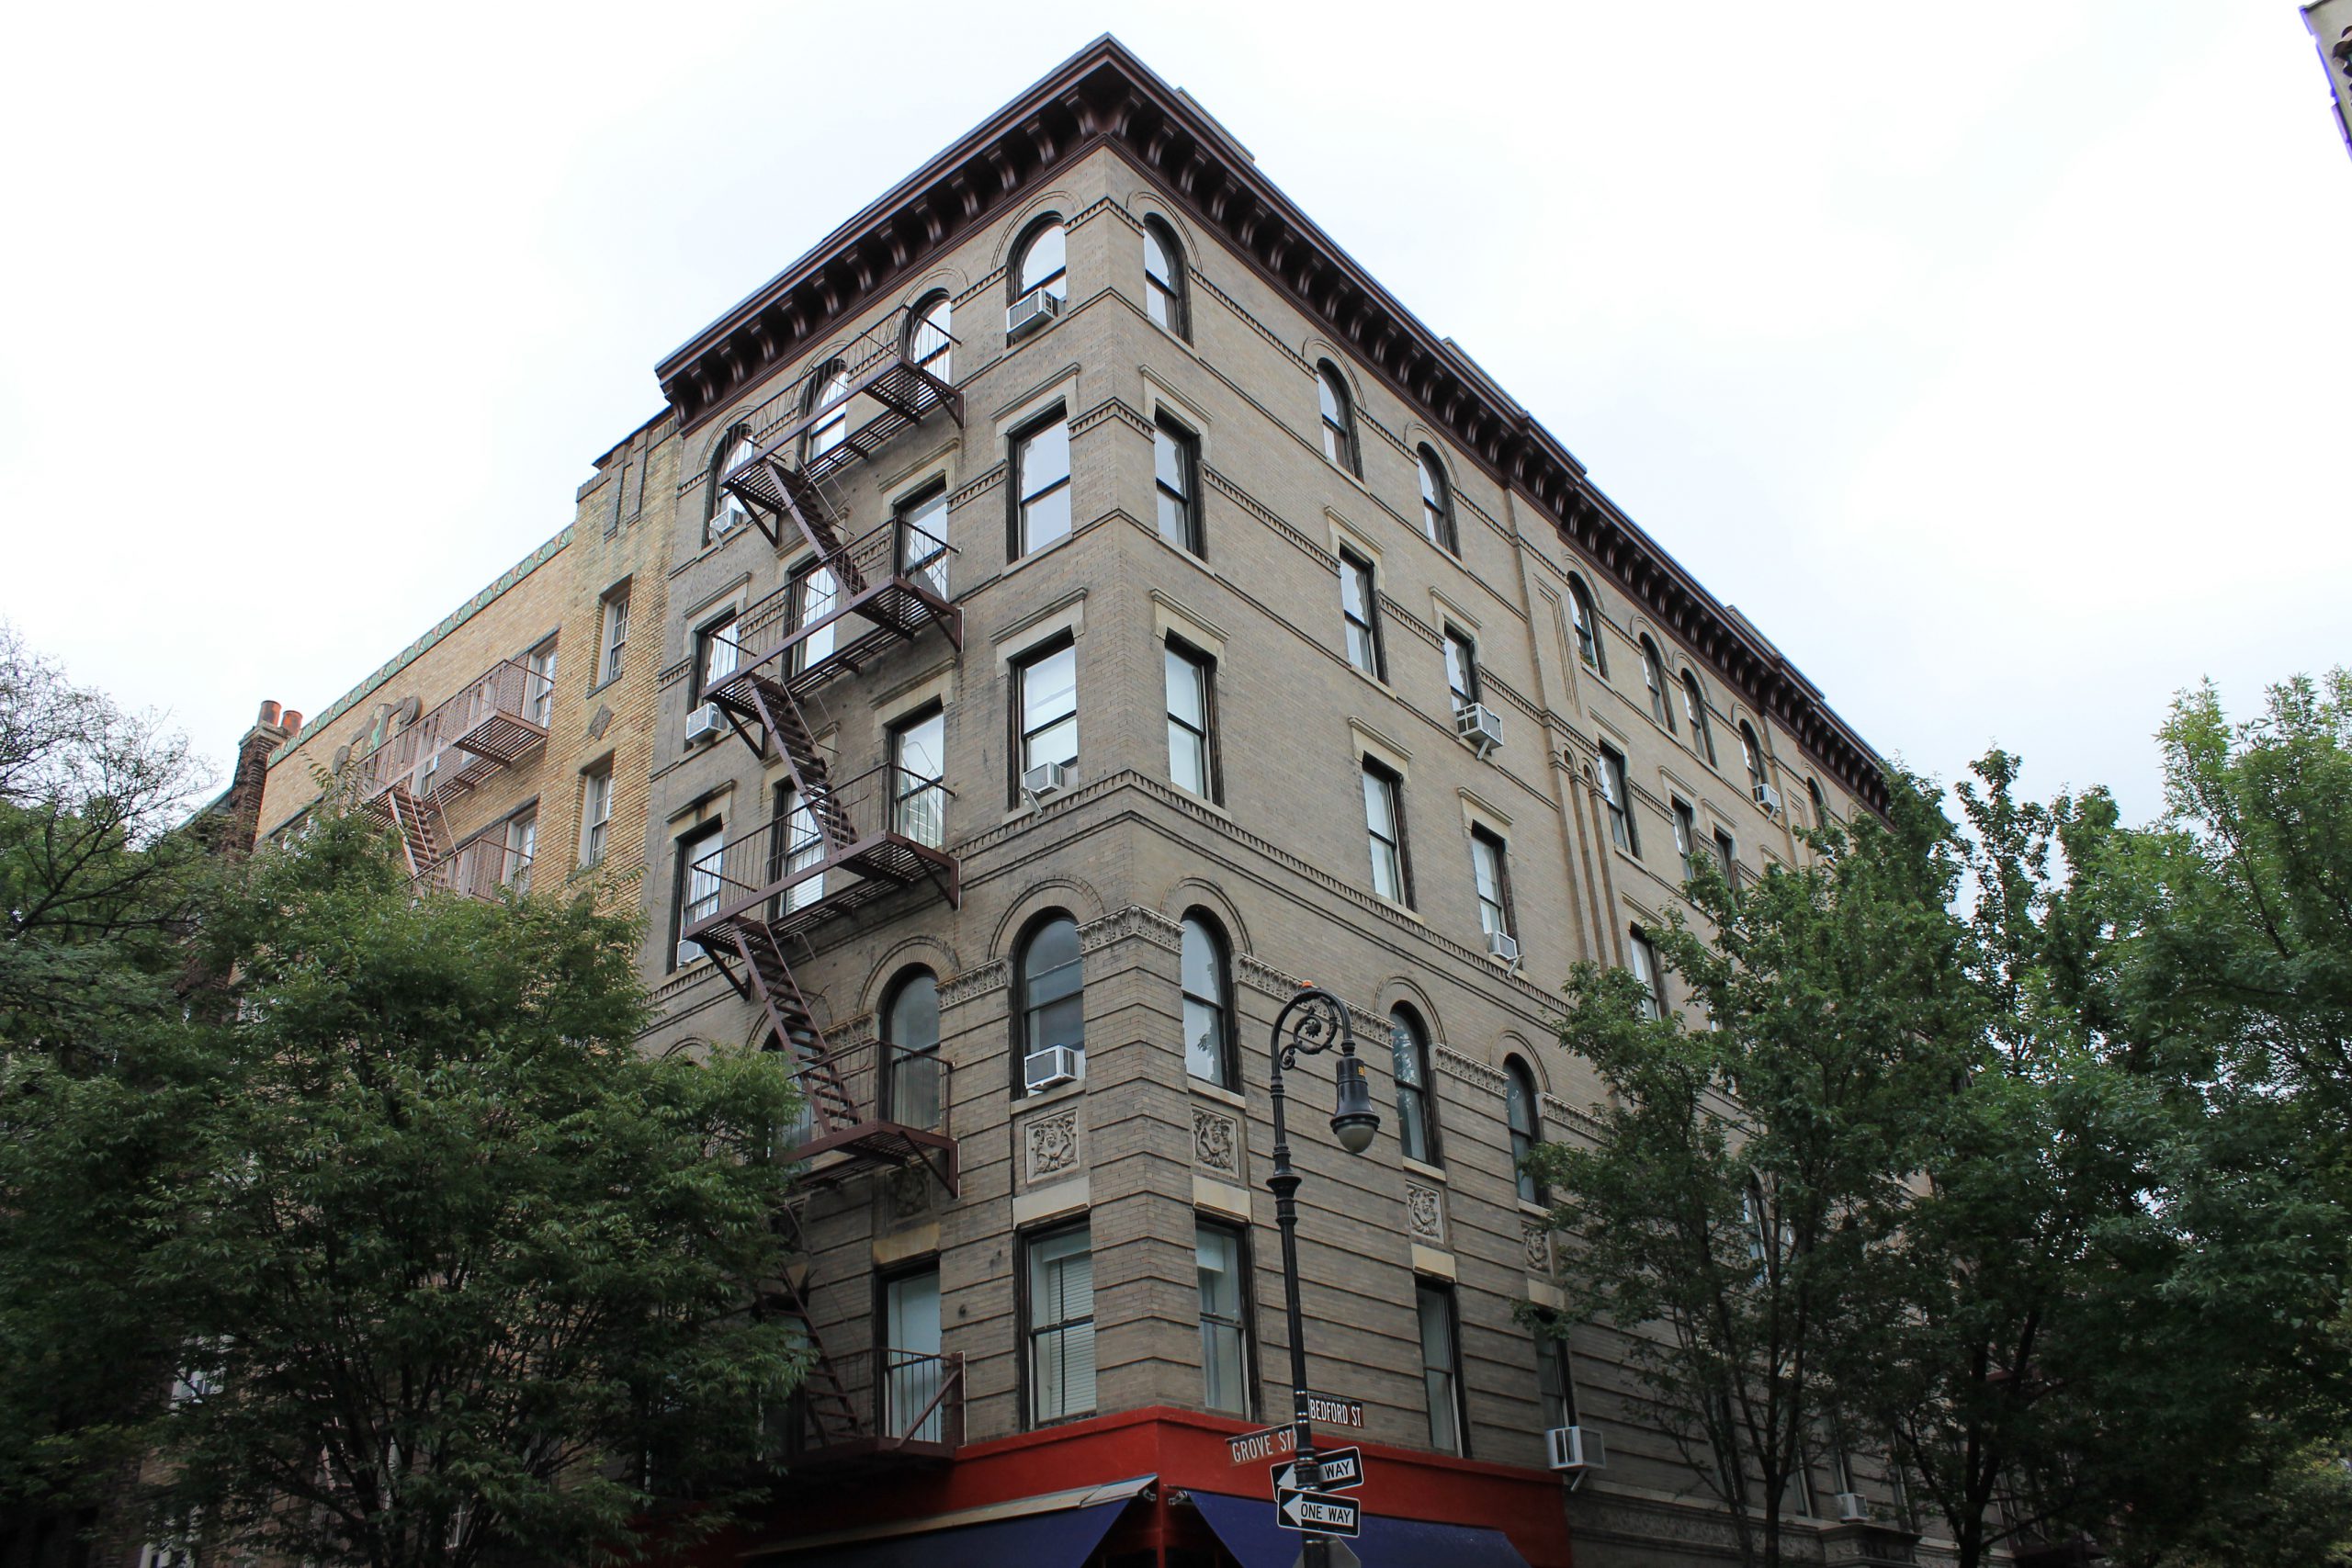 Friends TV Show Apartment Building In Greenwich Village New York